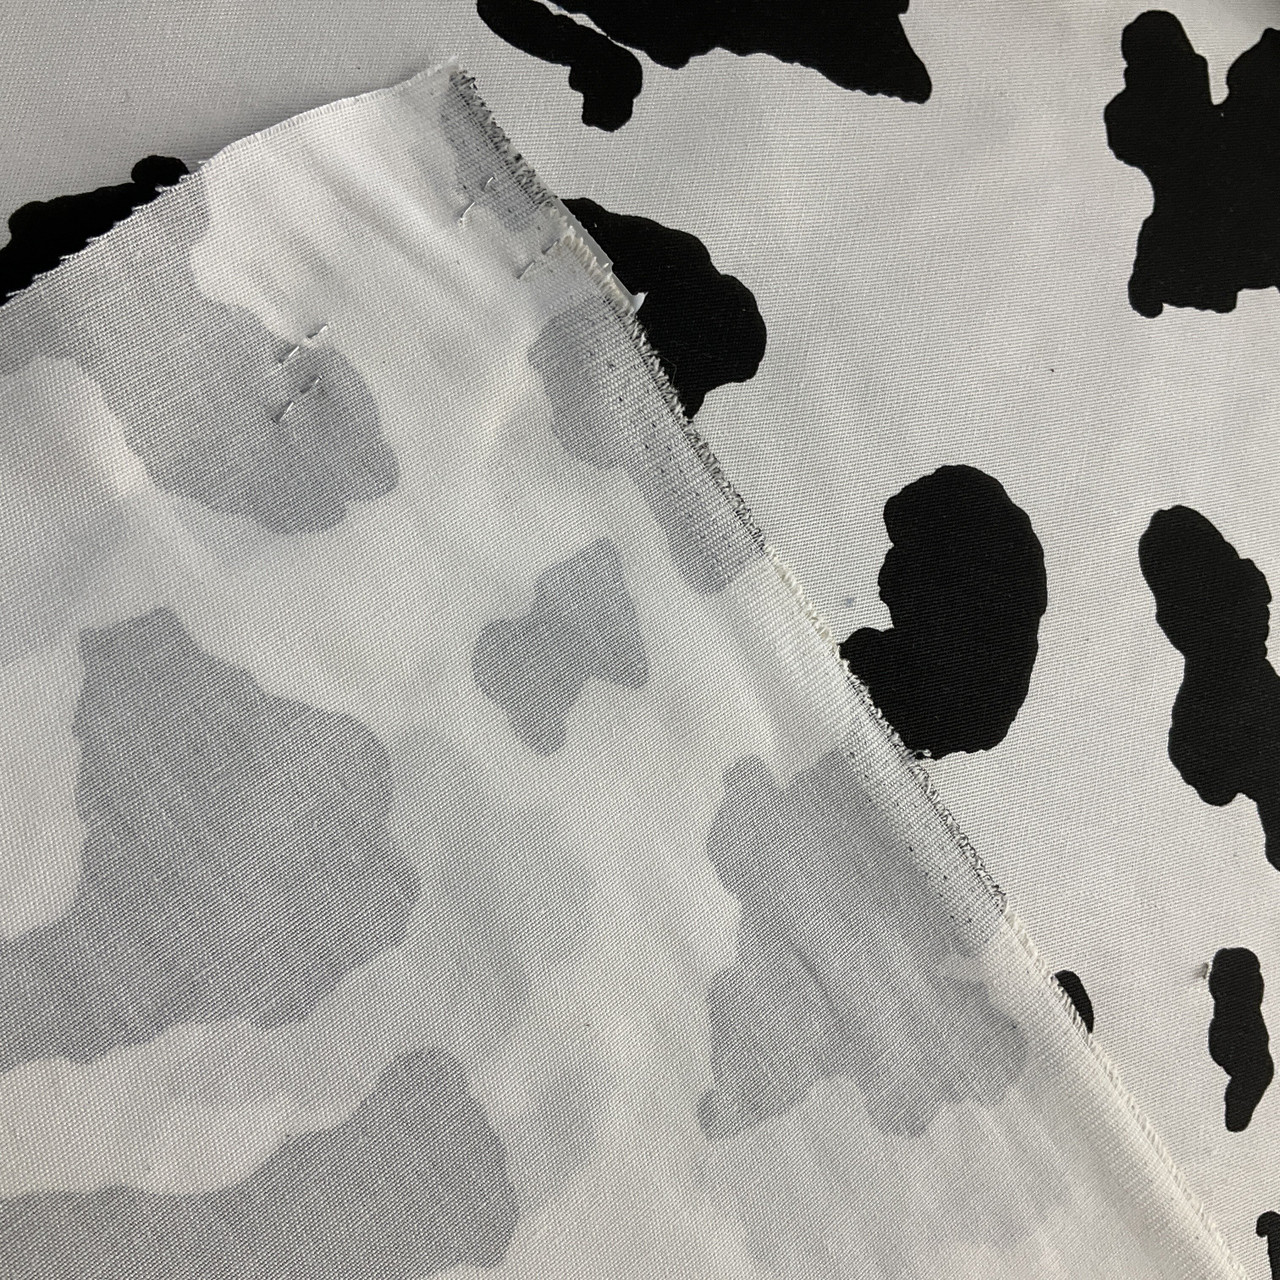 Black & White Cowhide Fabric, Animal Fabric, 100% Cotton, Duck Cloth, Home  Accents Fabric, Fabric by the yard, Accessories Fabric